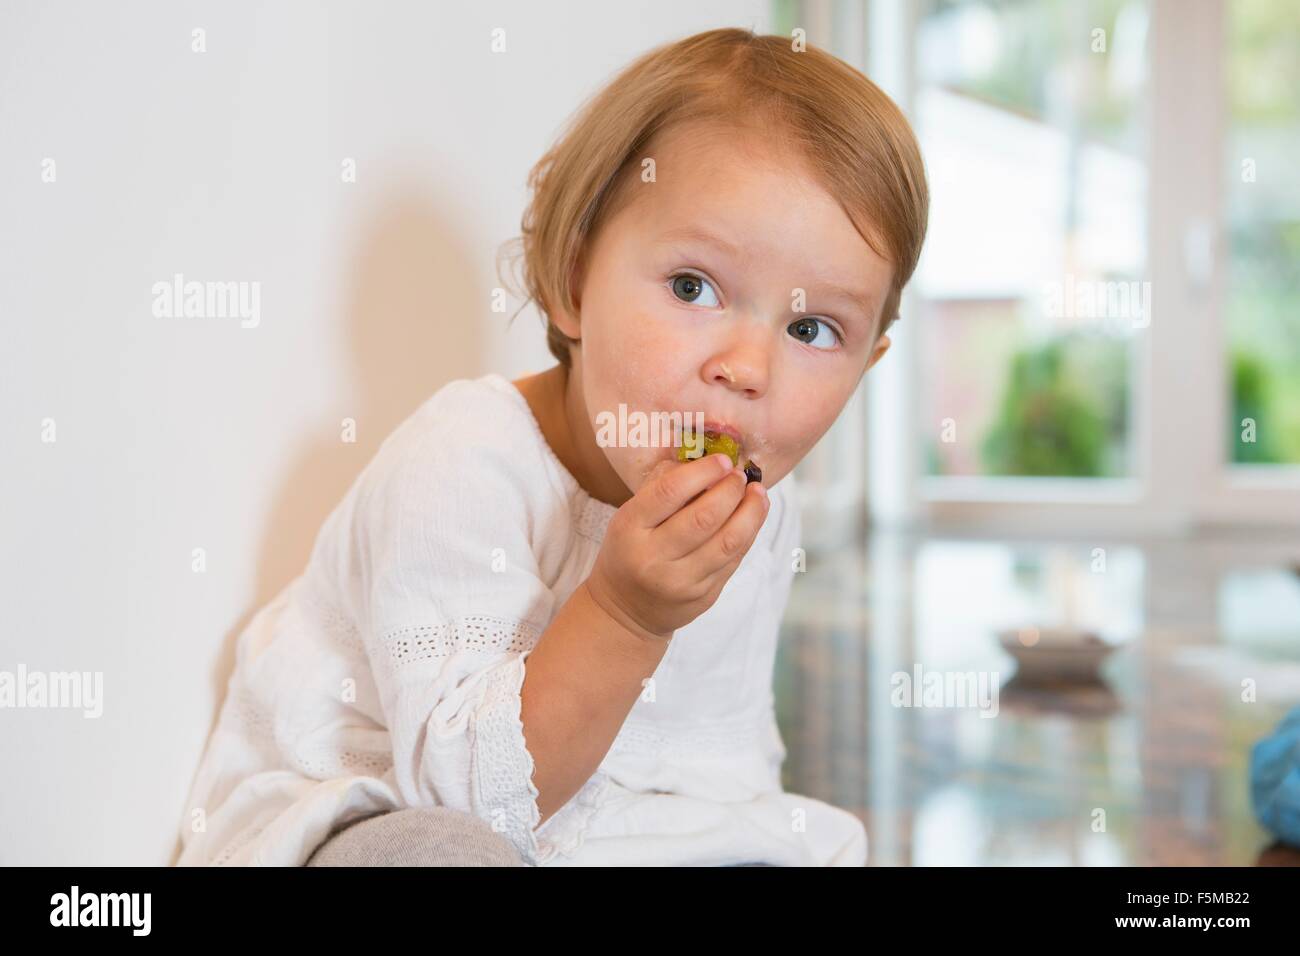 Portrait of female toddler eating plum in kitchen Stock Photo